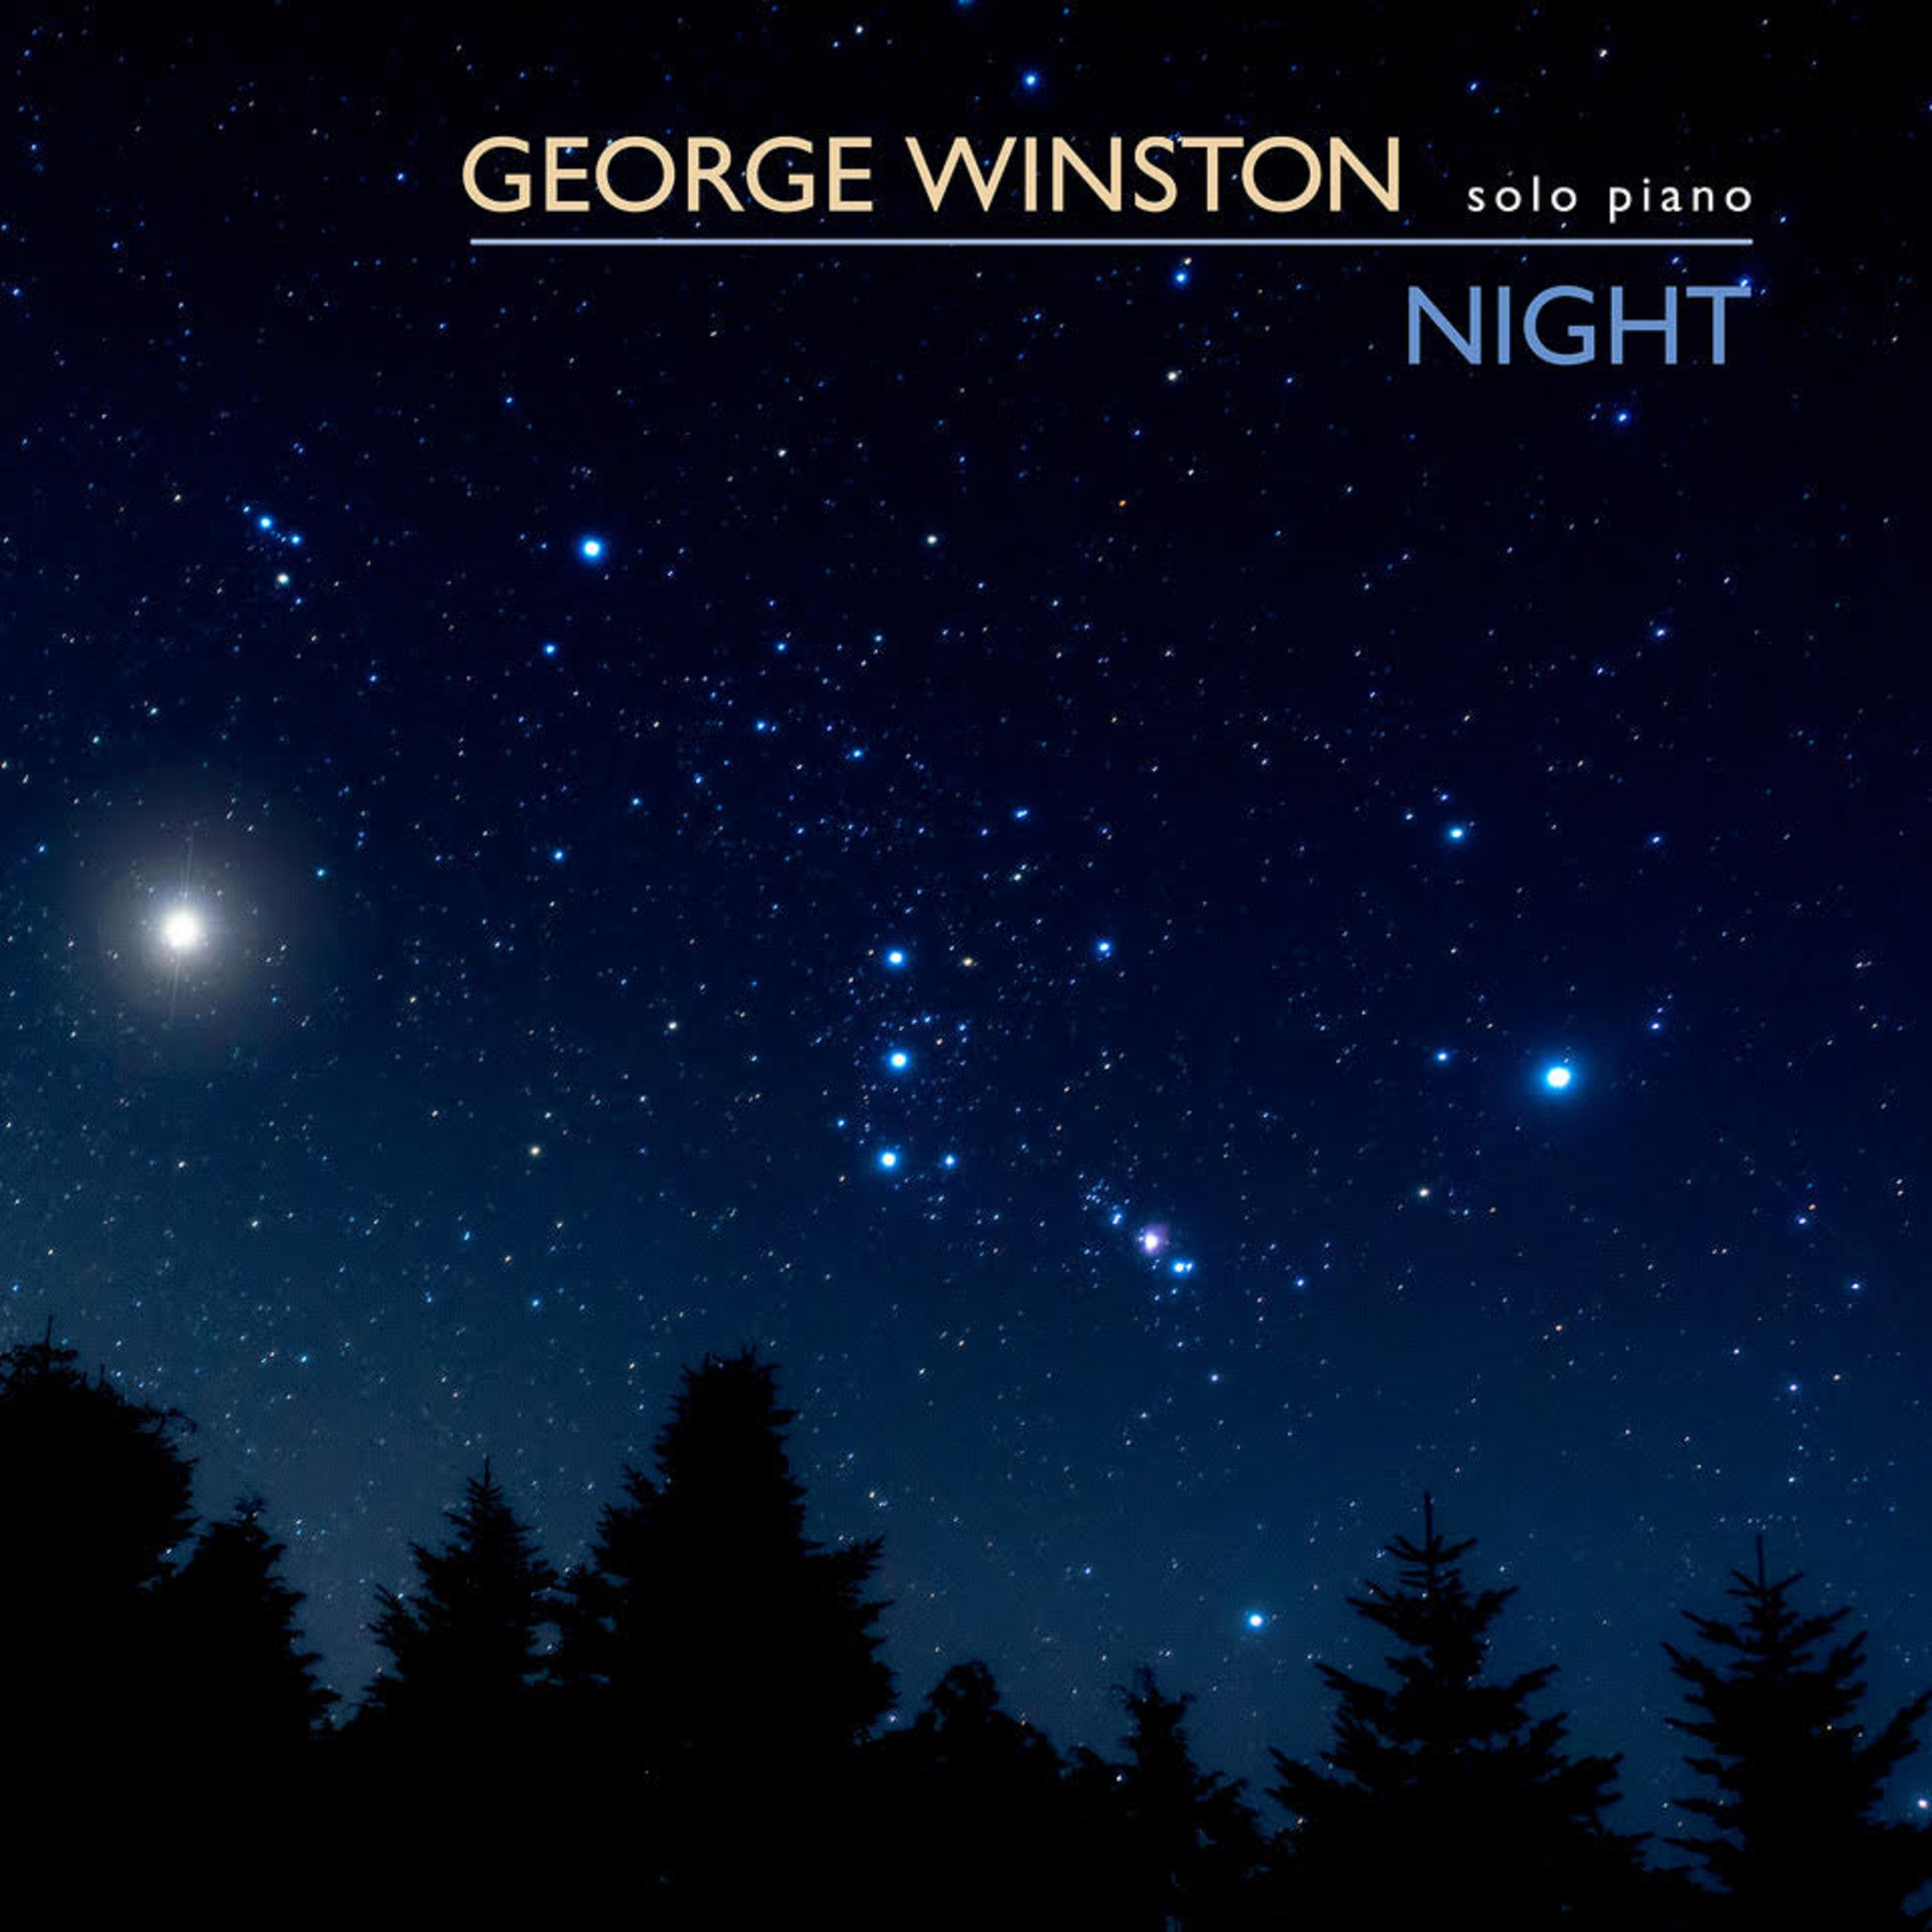 Acclaimed Pianist George Winston Releases Today New Album "NIGHT" on RCA Records + New Single "Hallelujah